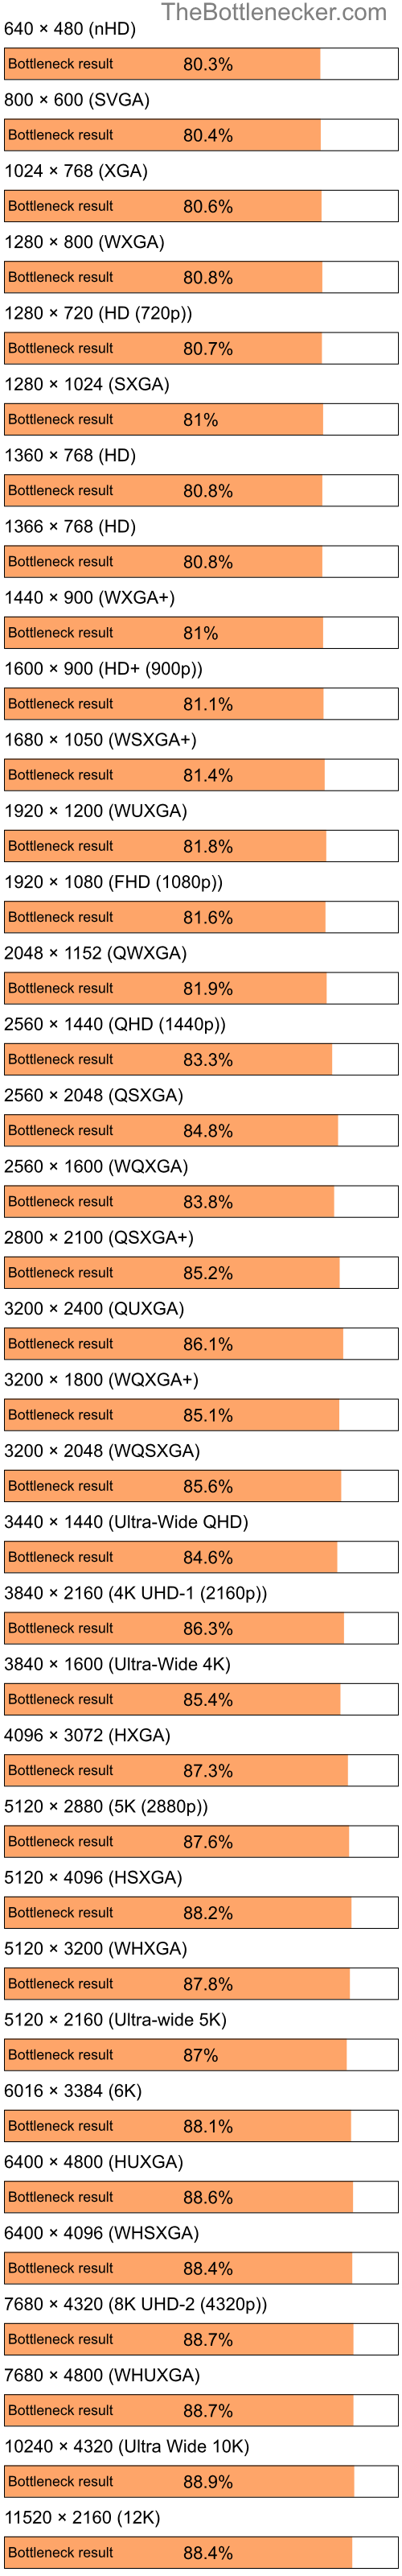 Bottleneck results by resolution for Intel Celeron M 410 and AMD Radeon X1250 in Graphic Card Intense Tasks